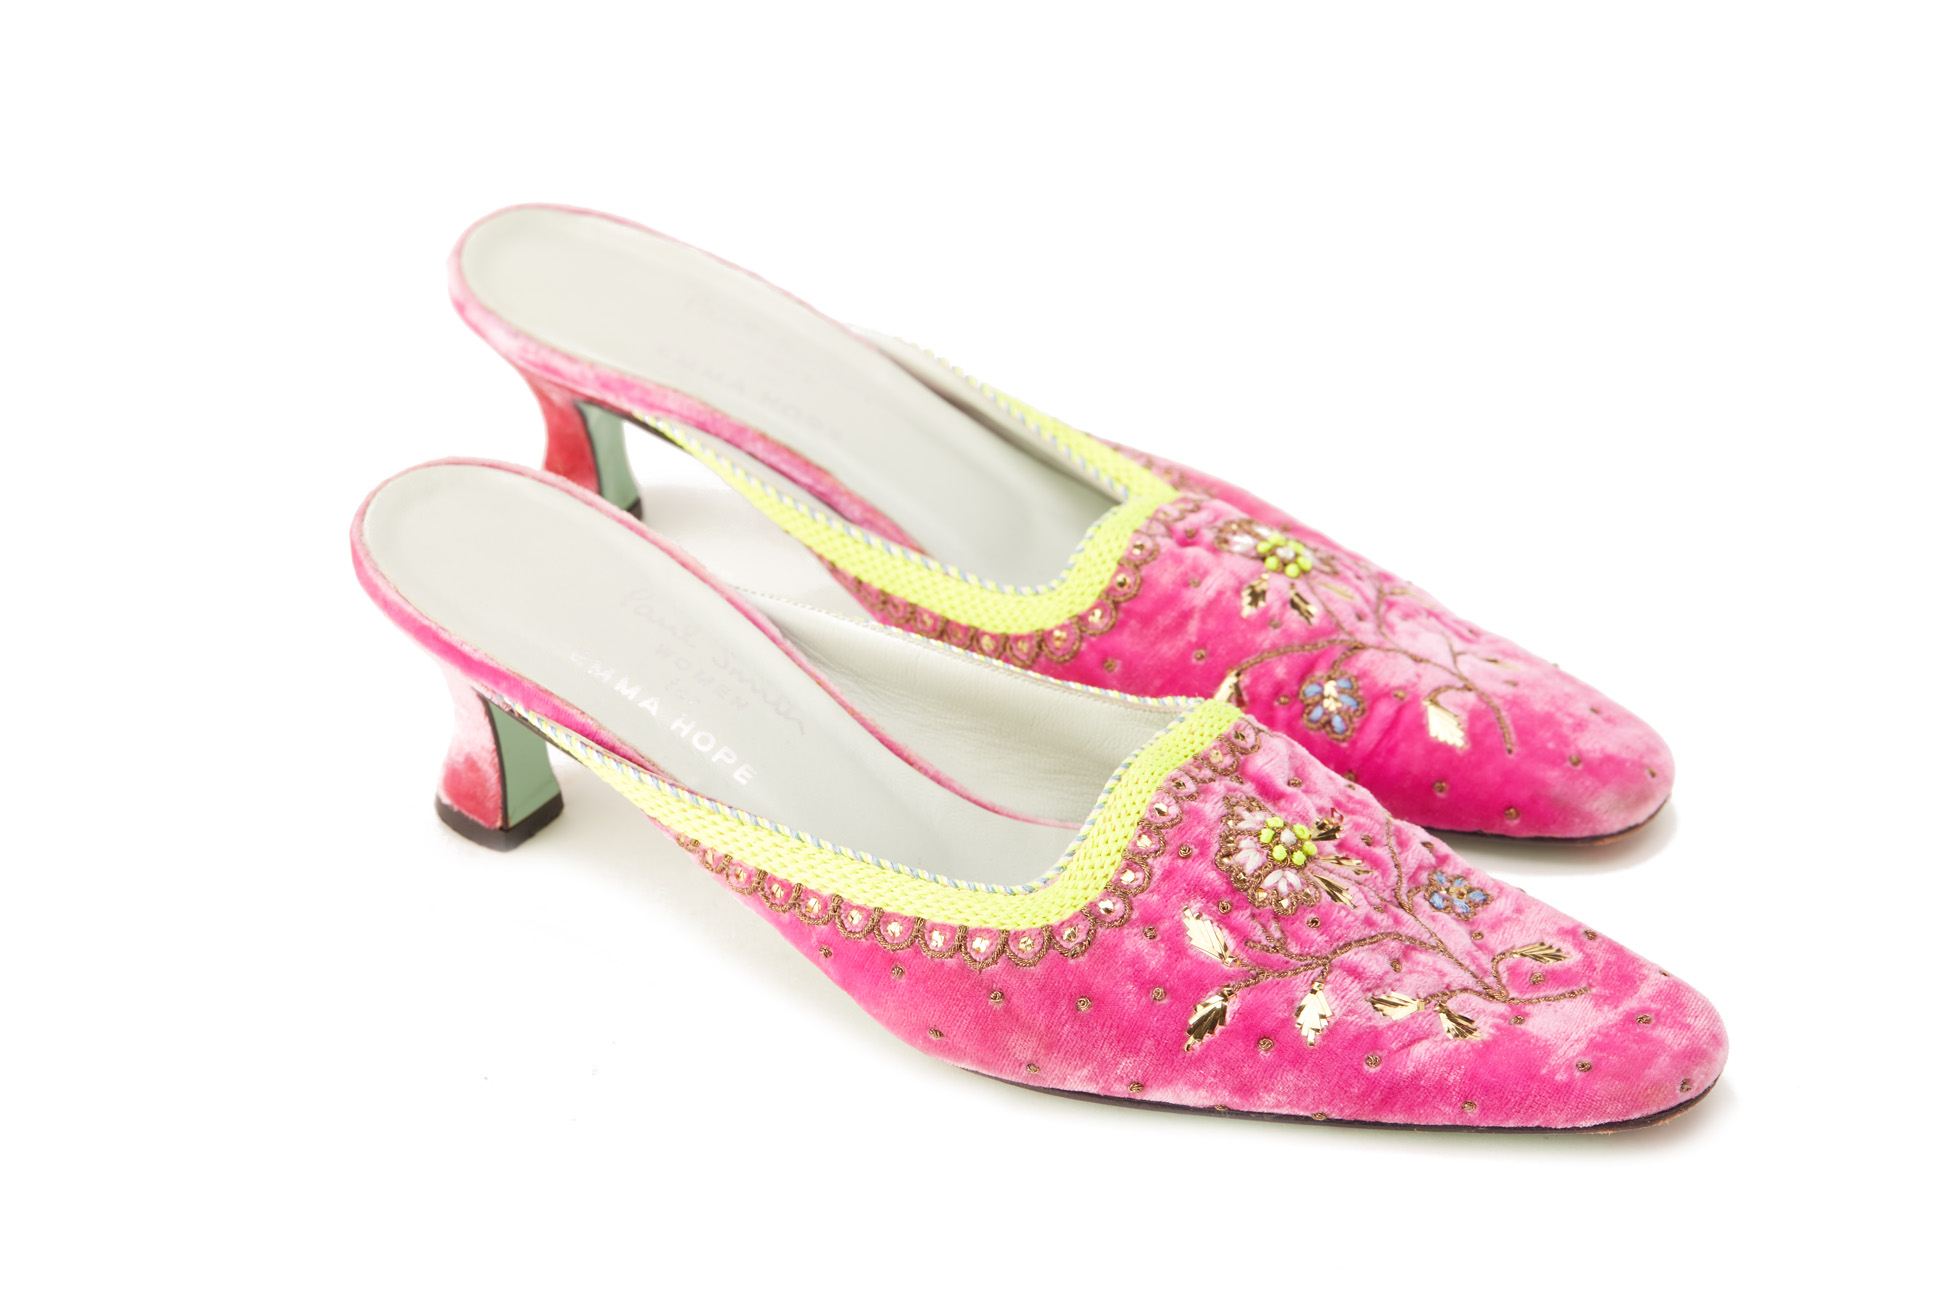 A PAIR OF PAUL SMITH PINK SUEDE EMBELLISHED HEELS EU 39.5